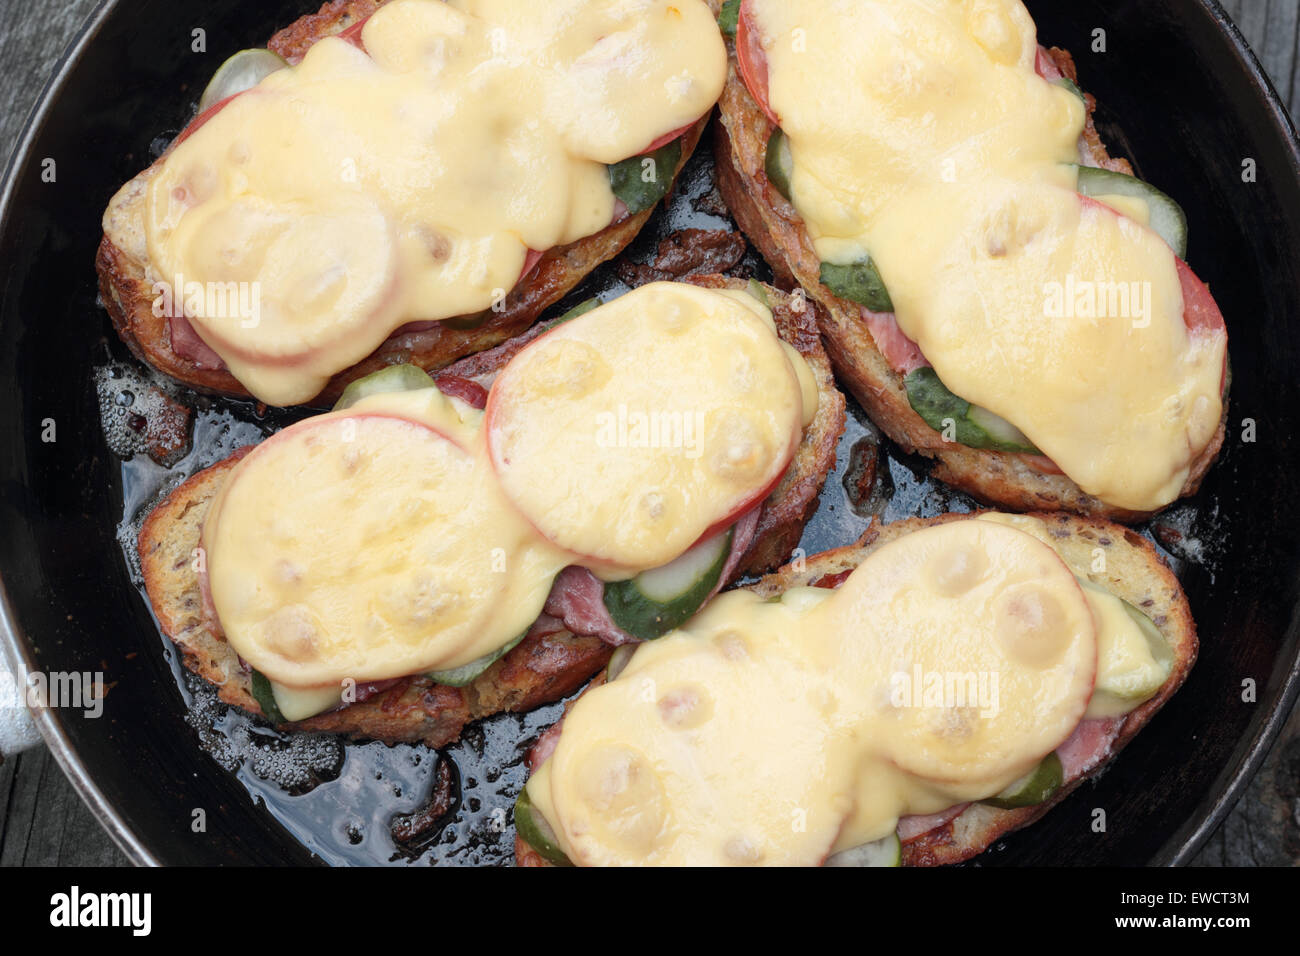 Freshly grilled slice of bread with pickles, tomatoes, ham and melted cheese. Stock Photo